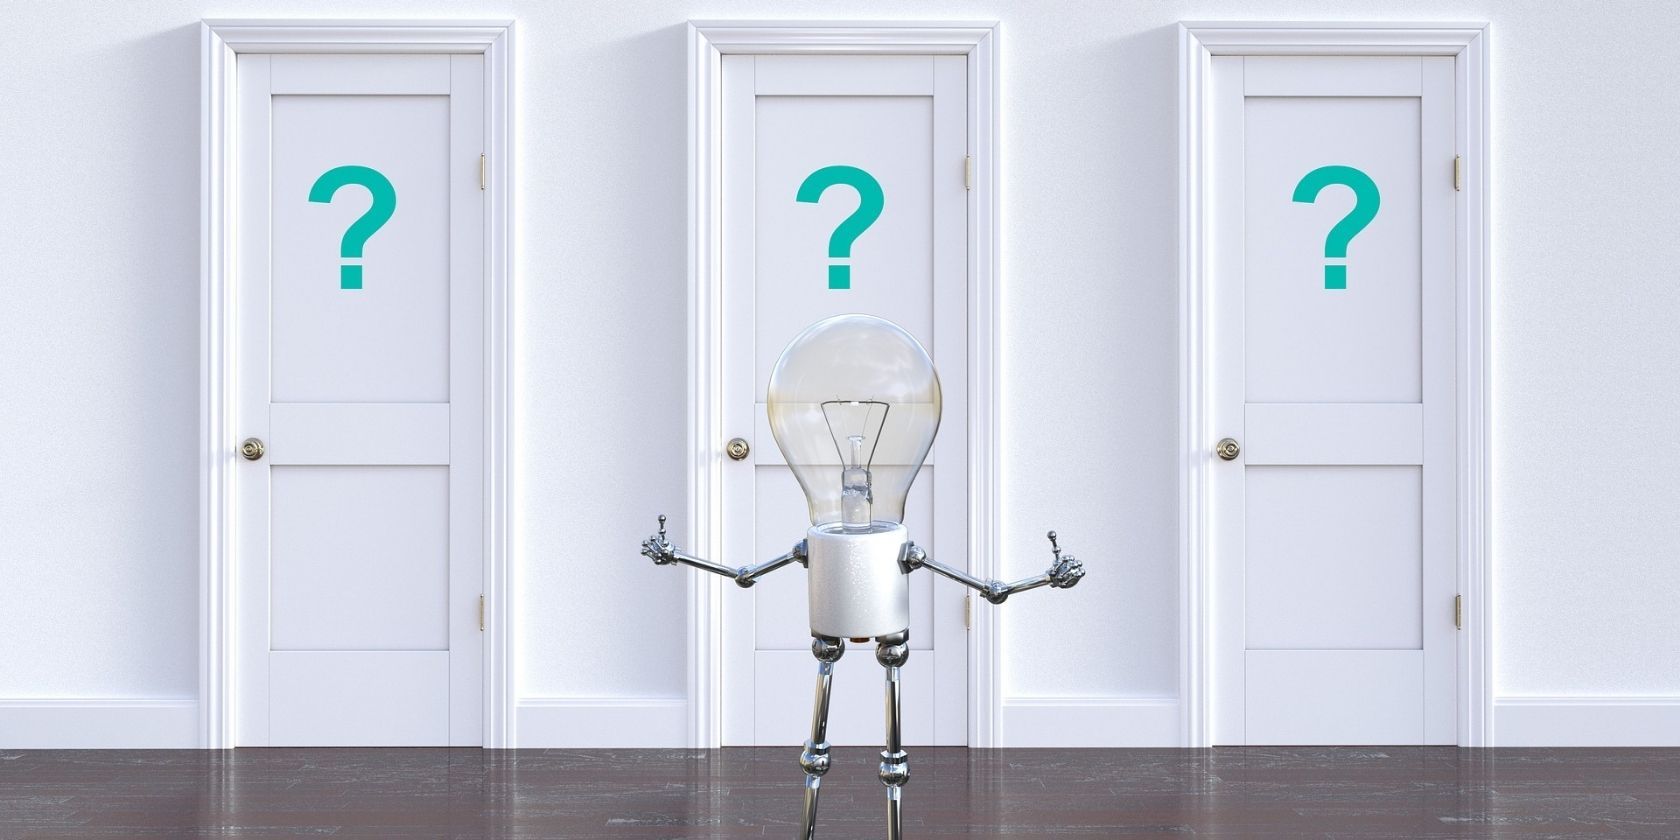 A lightbulb figure standing in front of three doors with question marks on them.